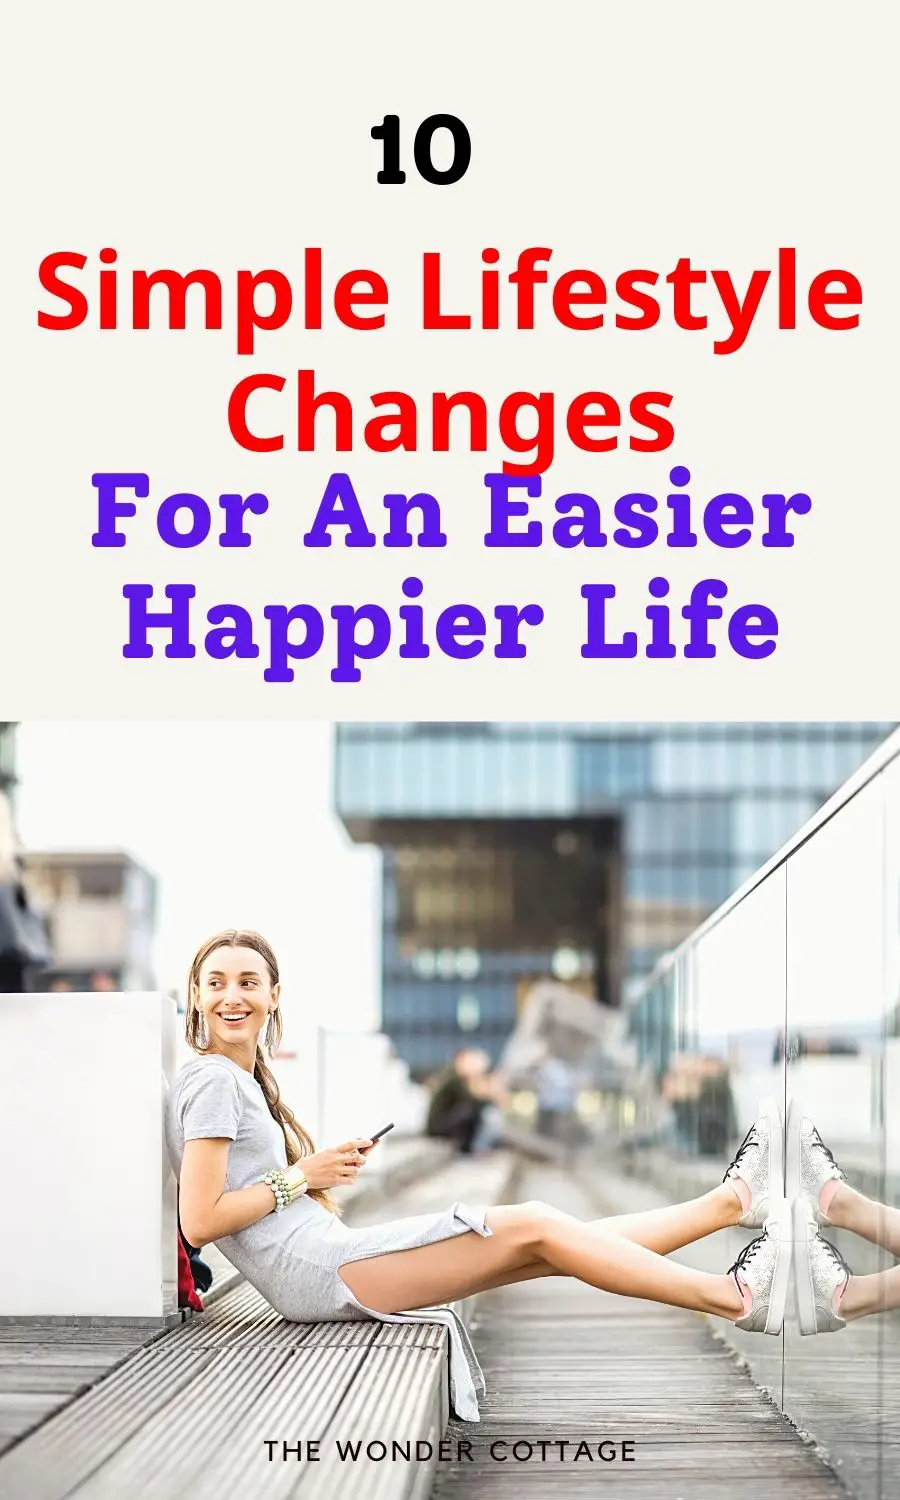 10 Simple Lifestyle Changes For An Easier, Happier Life